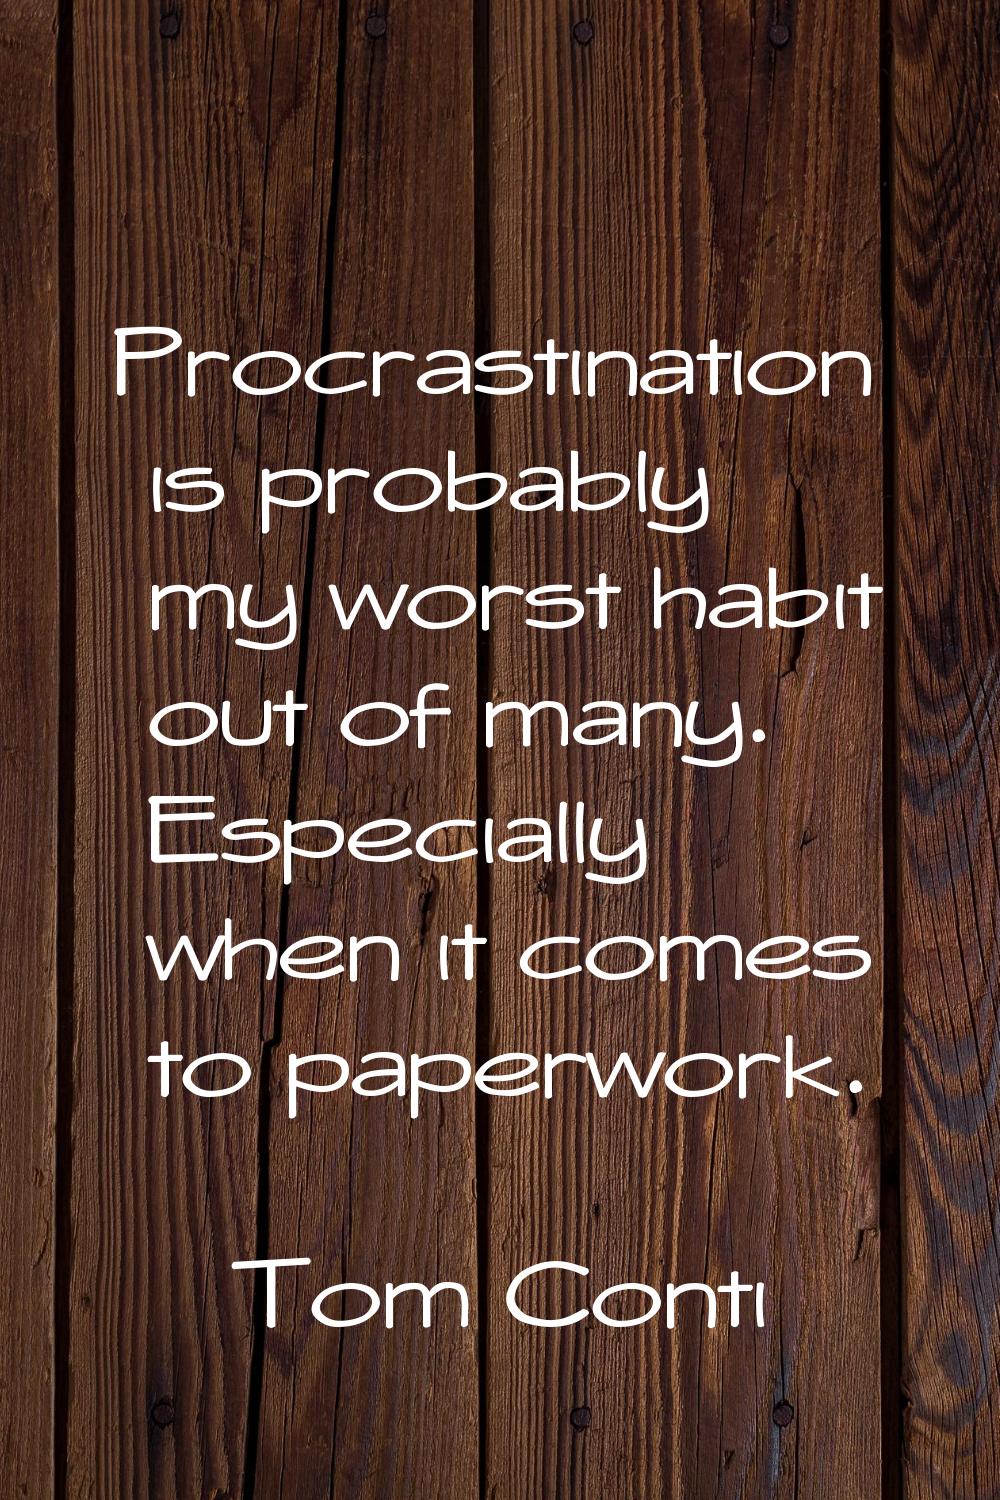 Procrastination is probably my worst habit out of many. Especially when it comes to paperwork.